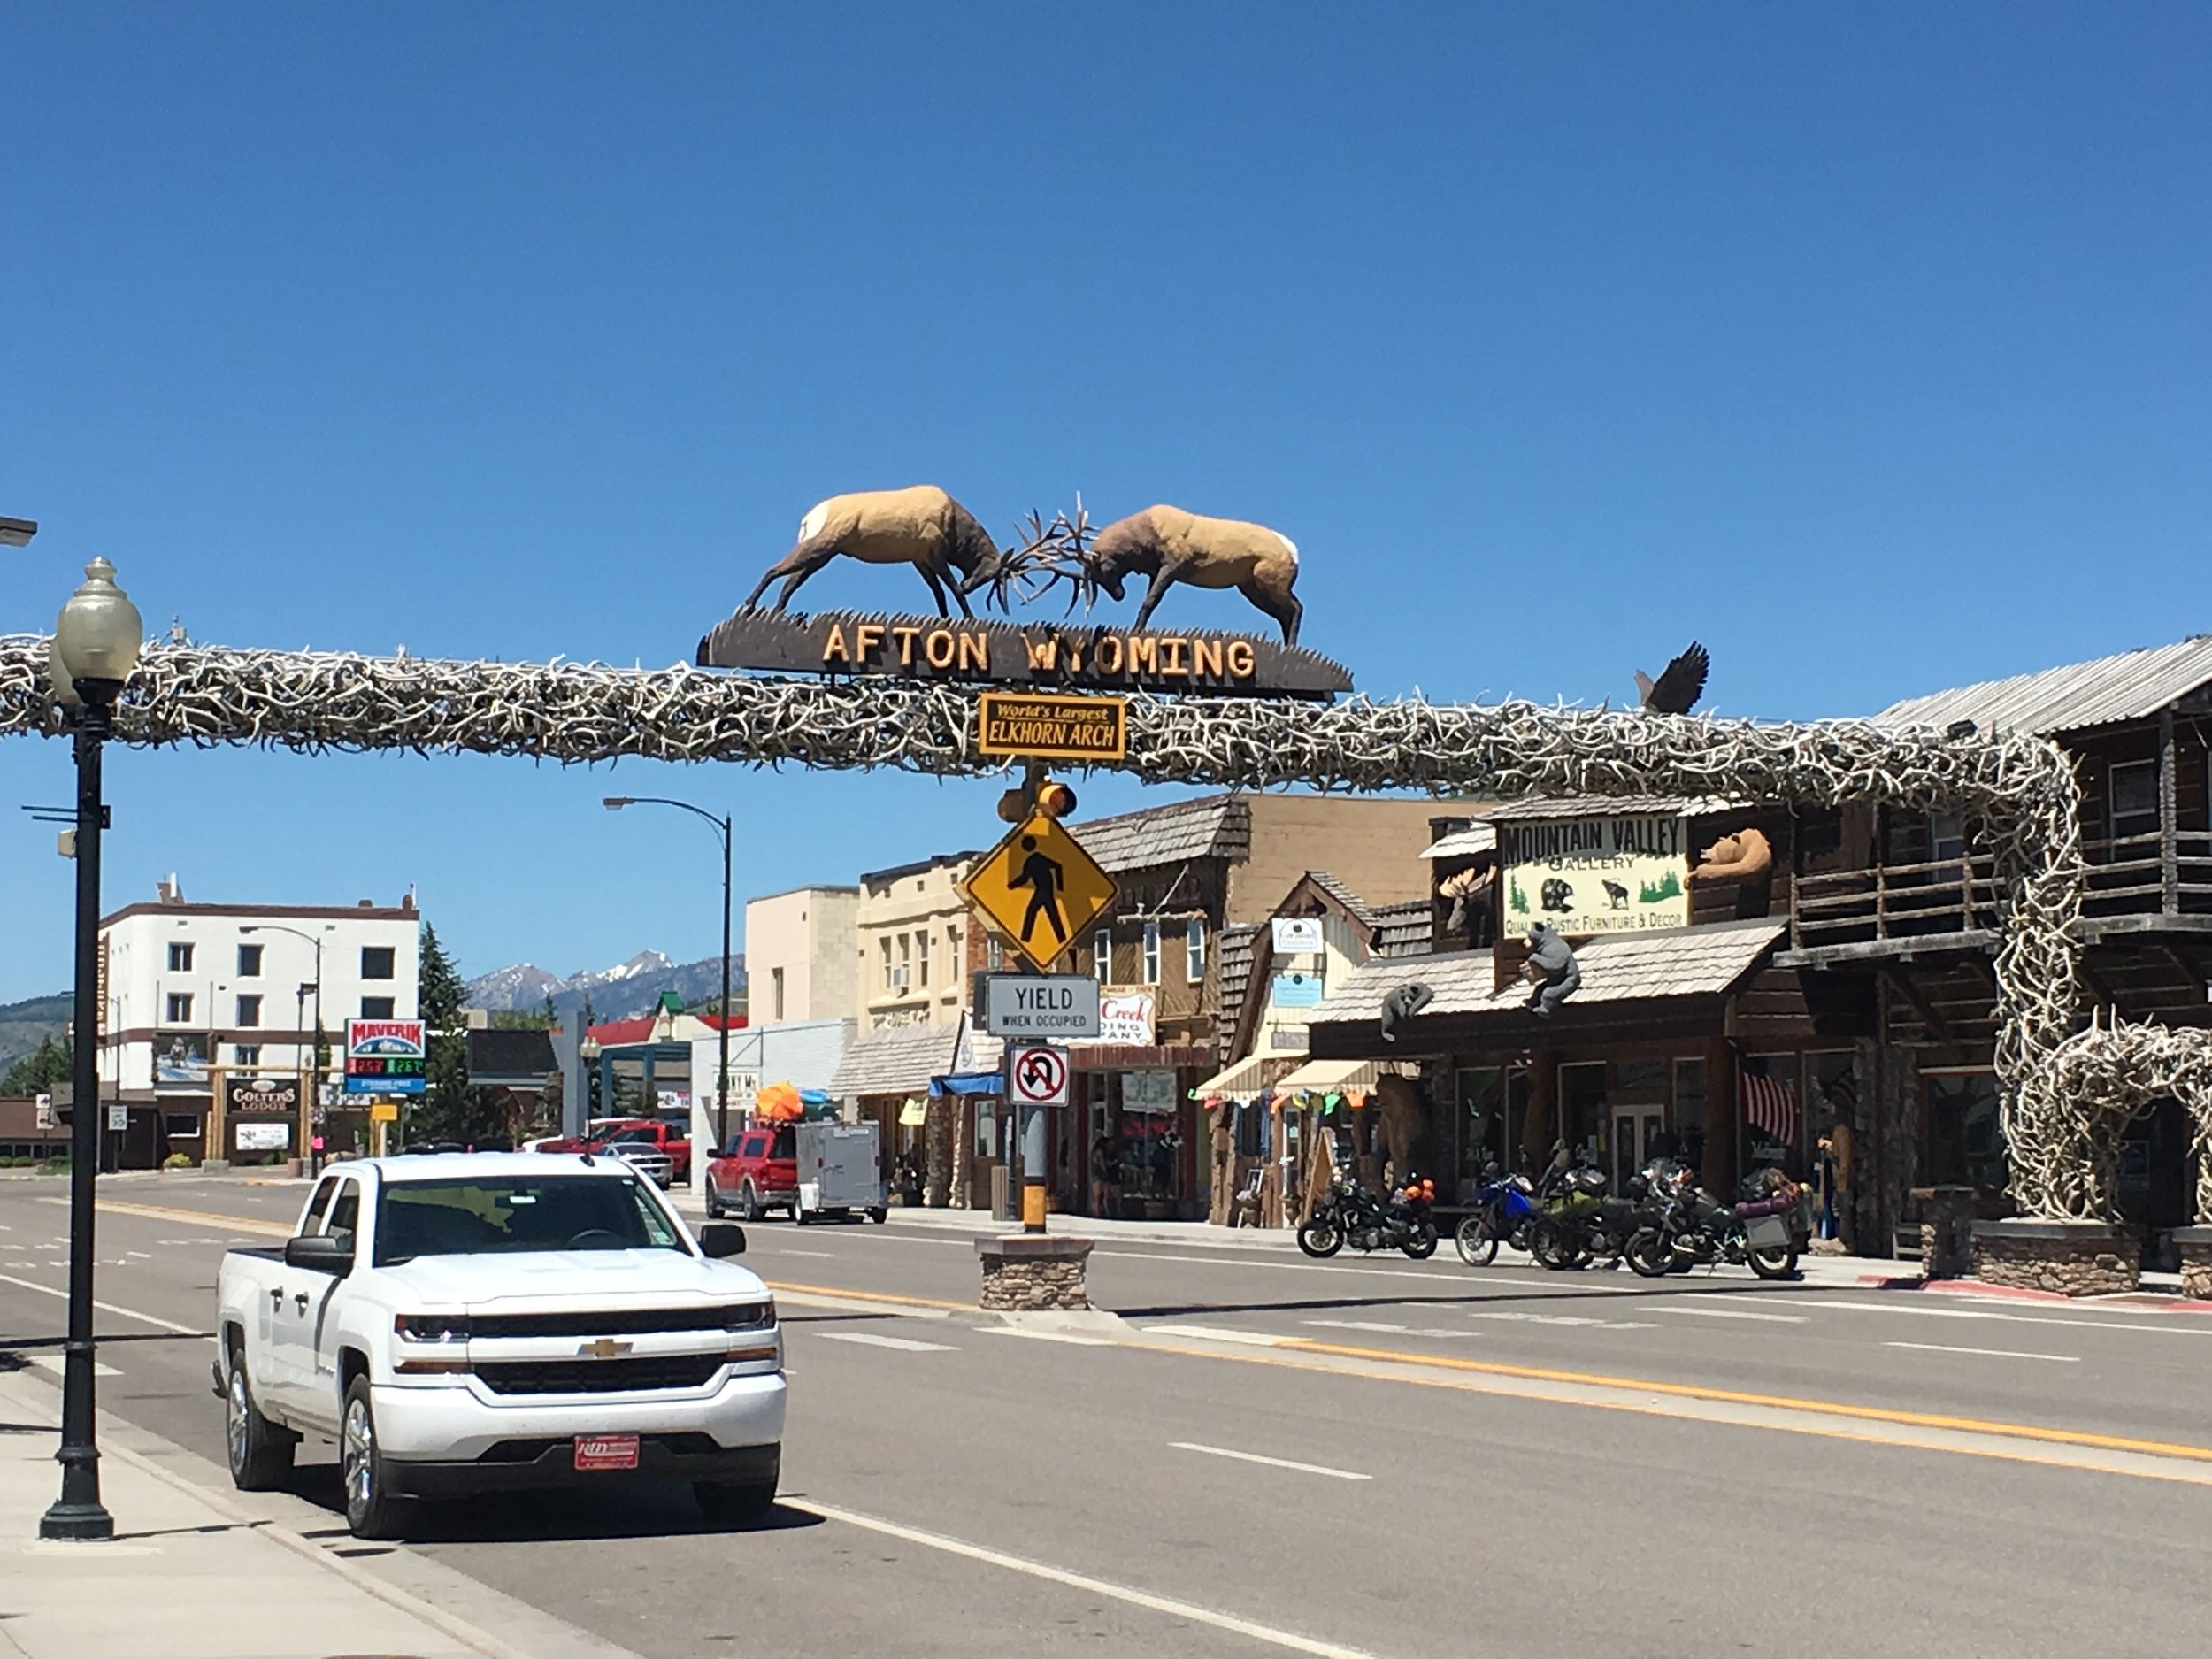 Downtown Afton with the world's largest antler arch